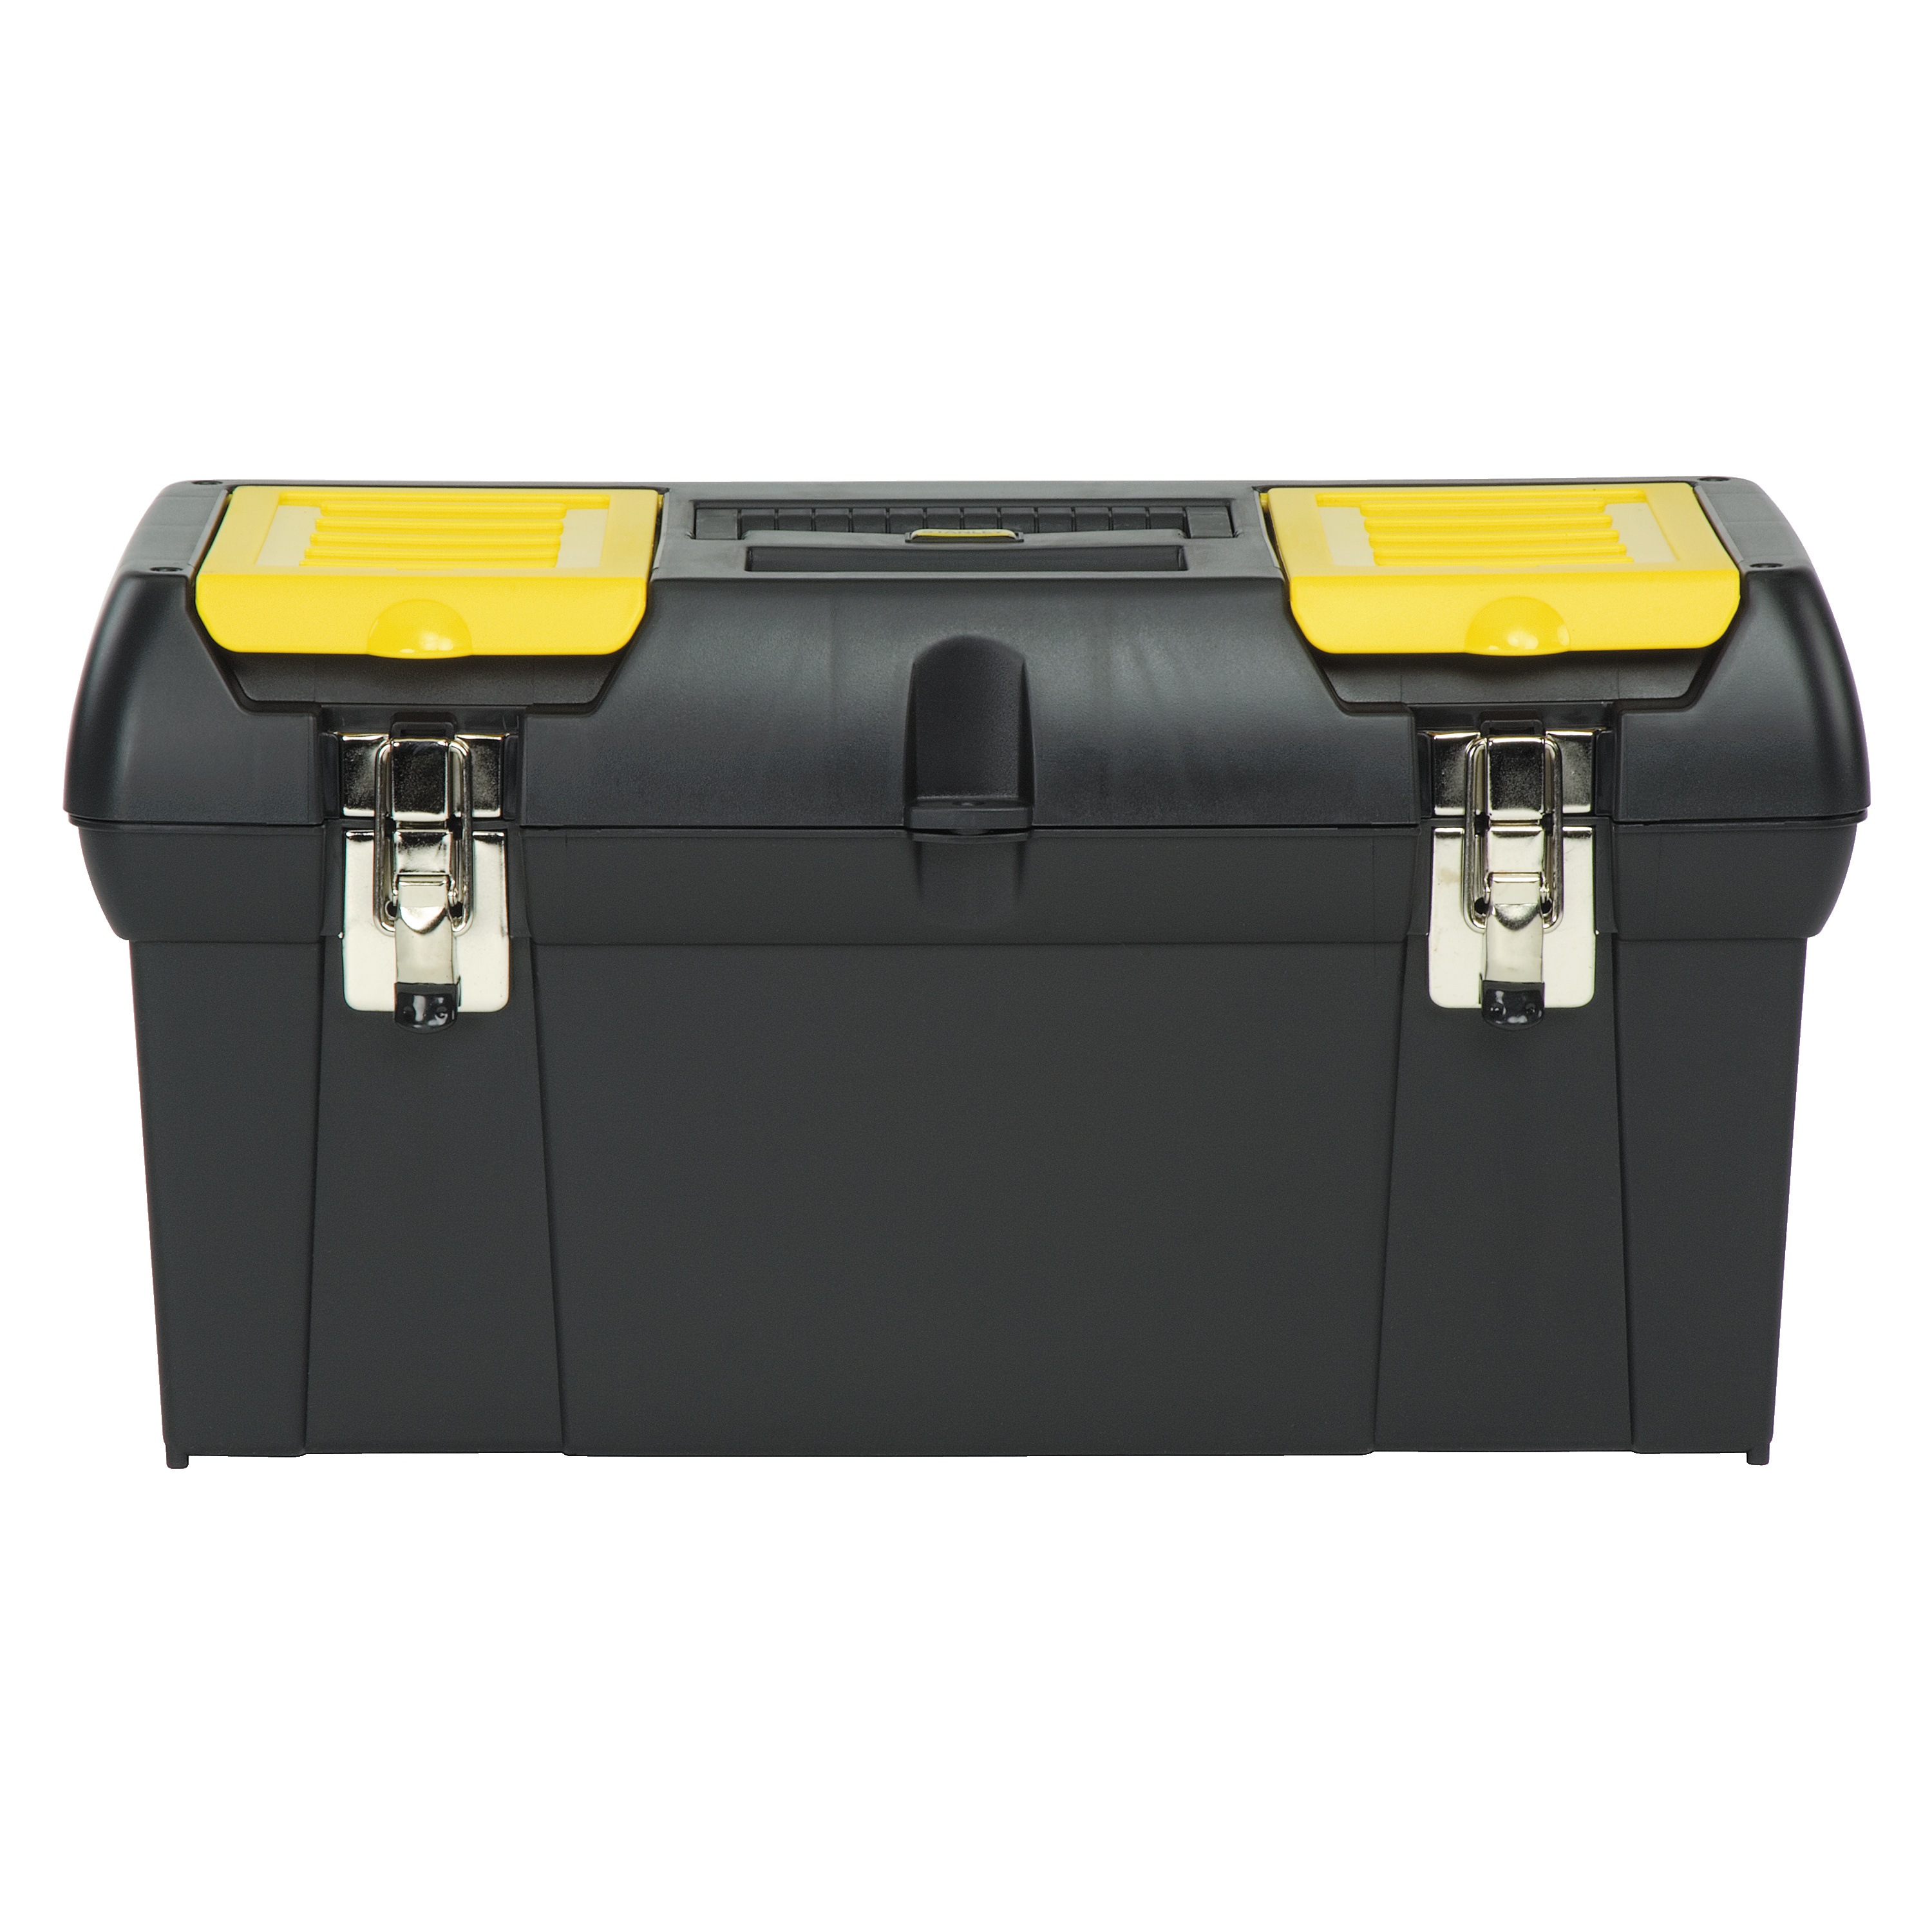 Stanley Tools - 24 in Series 2000 Toolbox with Tray - 024013S